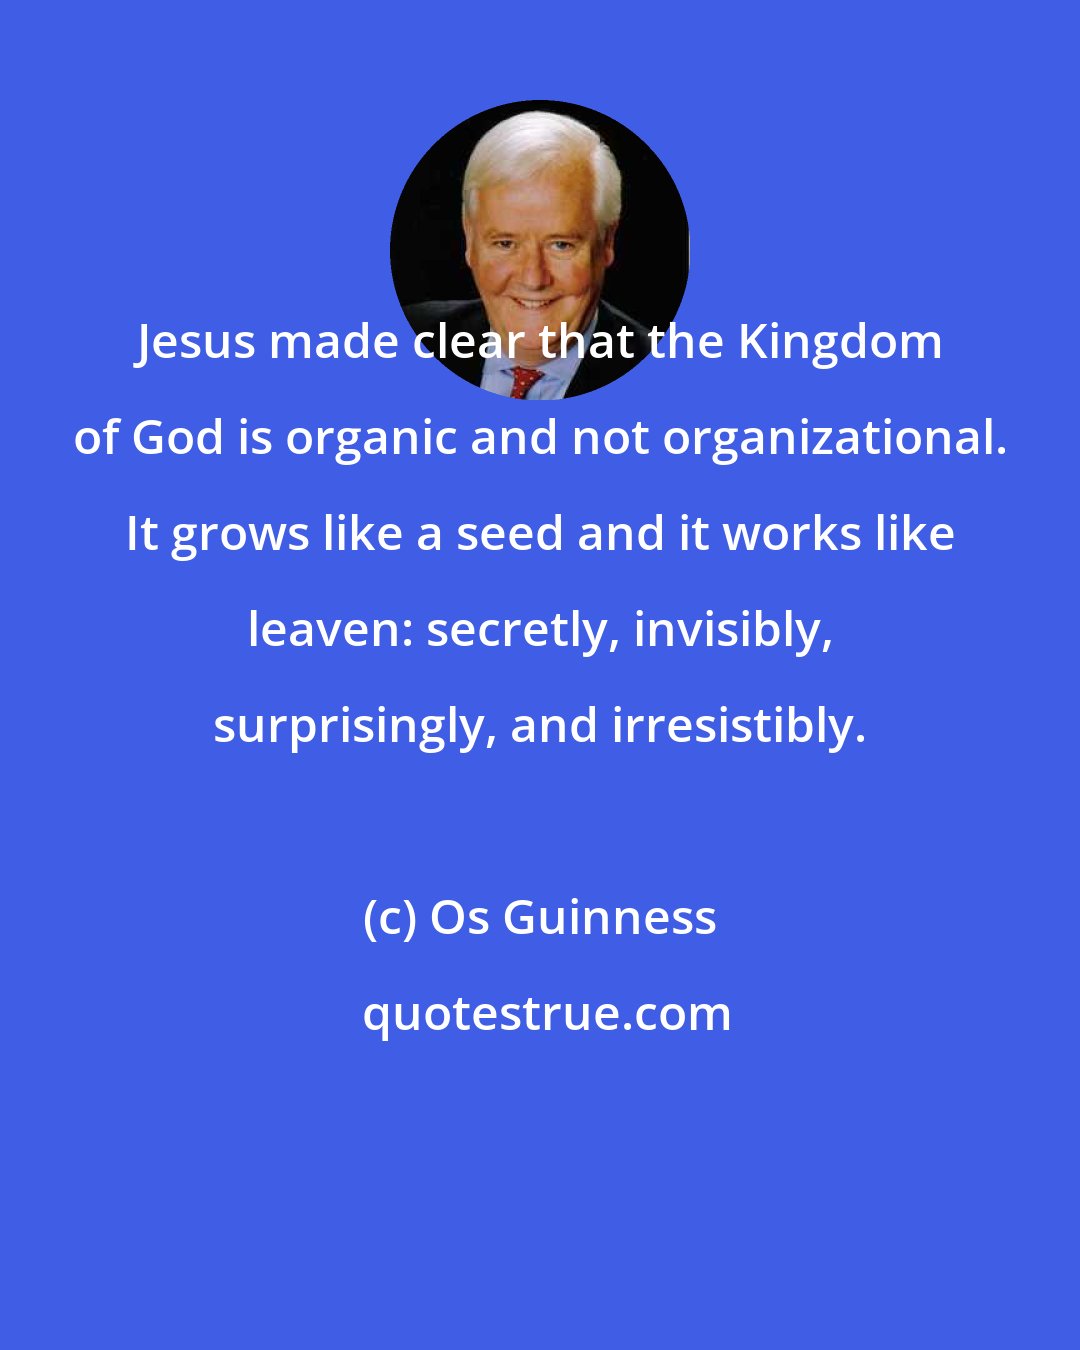 Os Guinness: Jesus made clear that the Kingdom of God is organic and not organizational. It grows like a seed and it works like leaven: secretly, invisibly, surprisingly, and irresistibly.